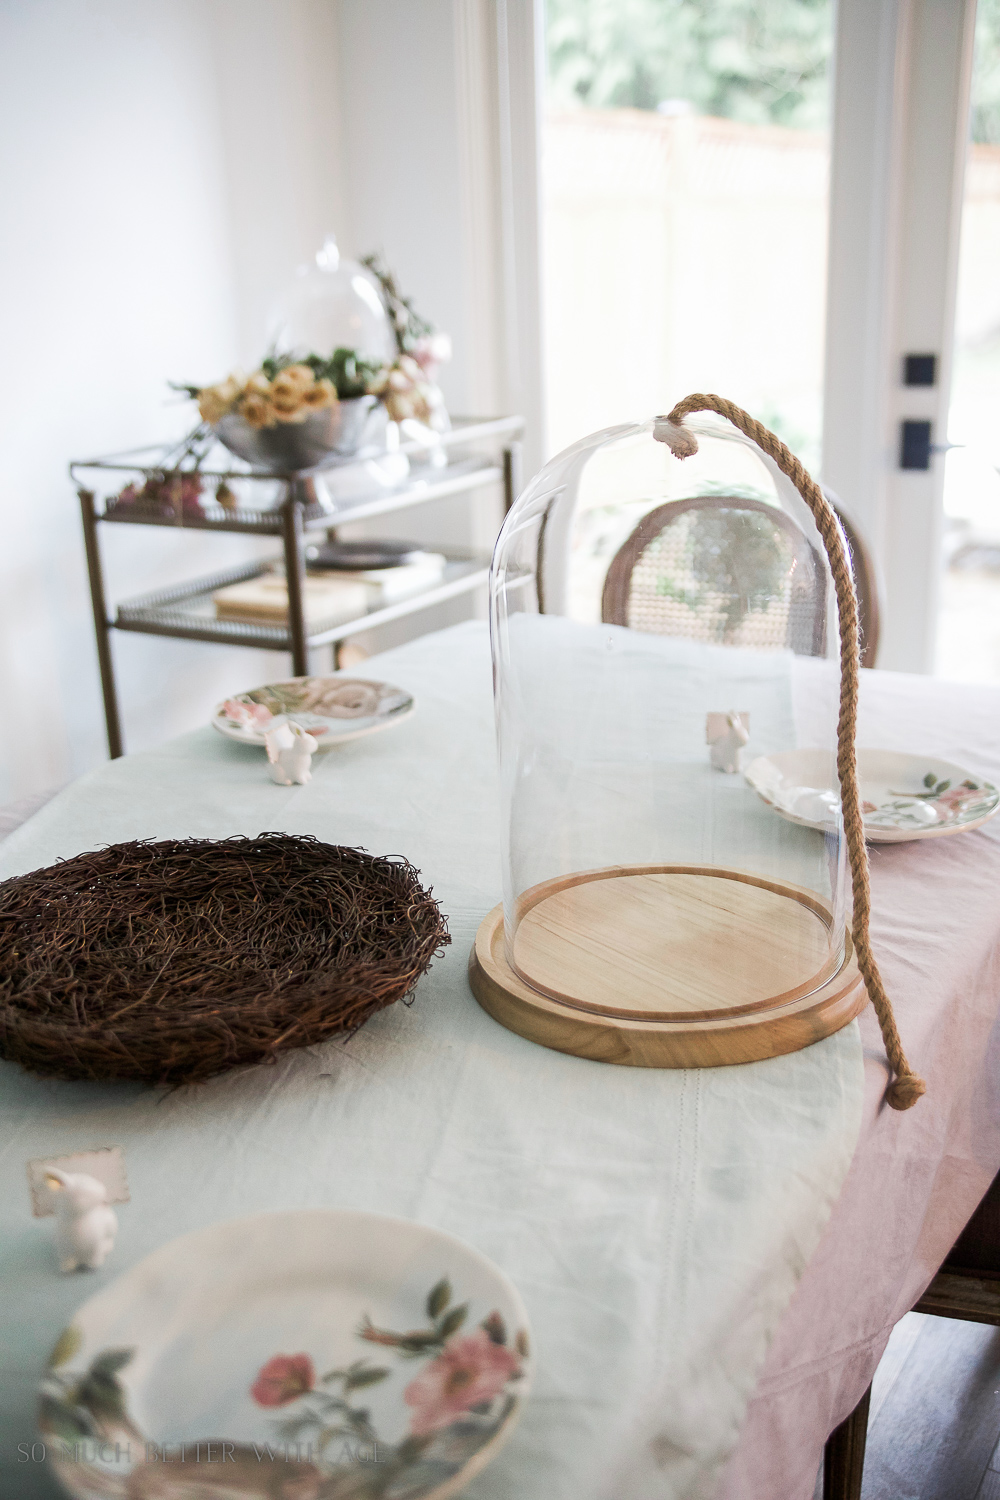 How to Set a Peter Rabbit Inspired Easter Table/cloche and plates on table - So Much Better With Age